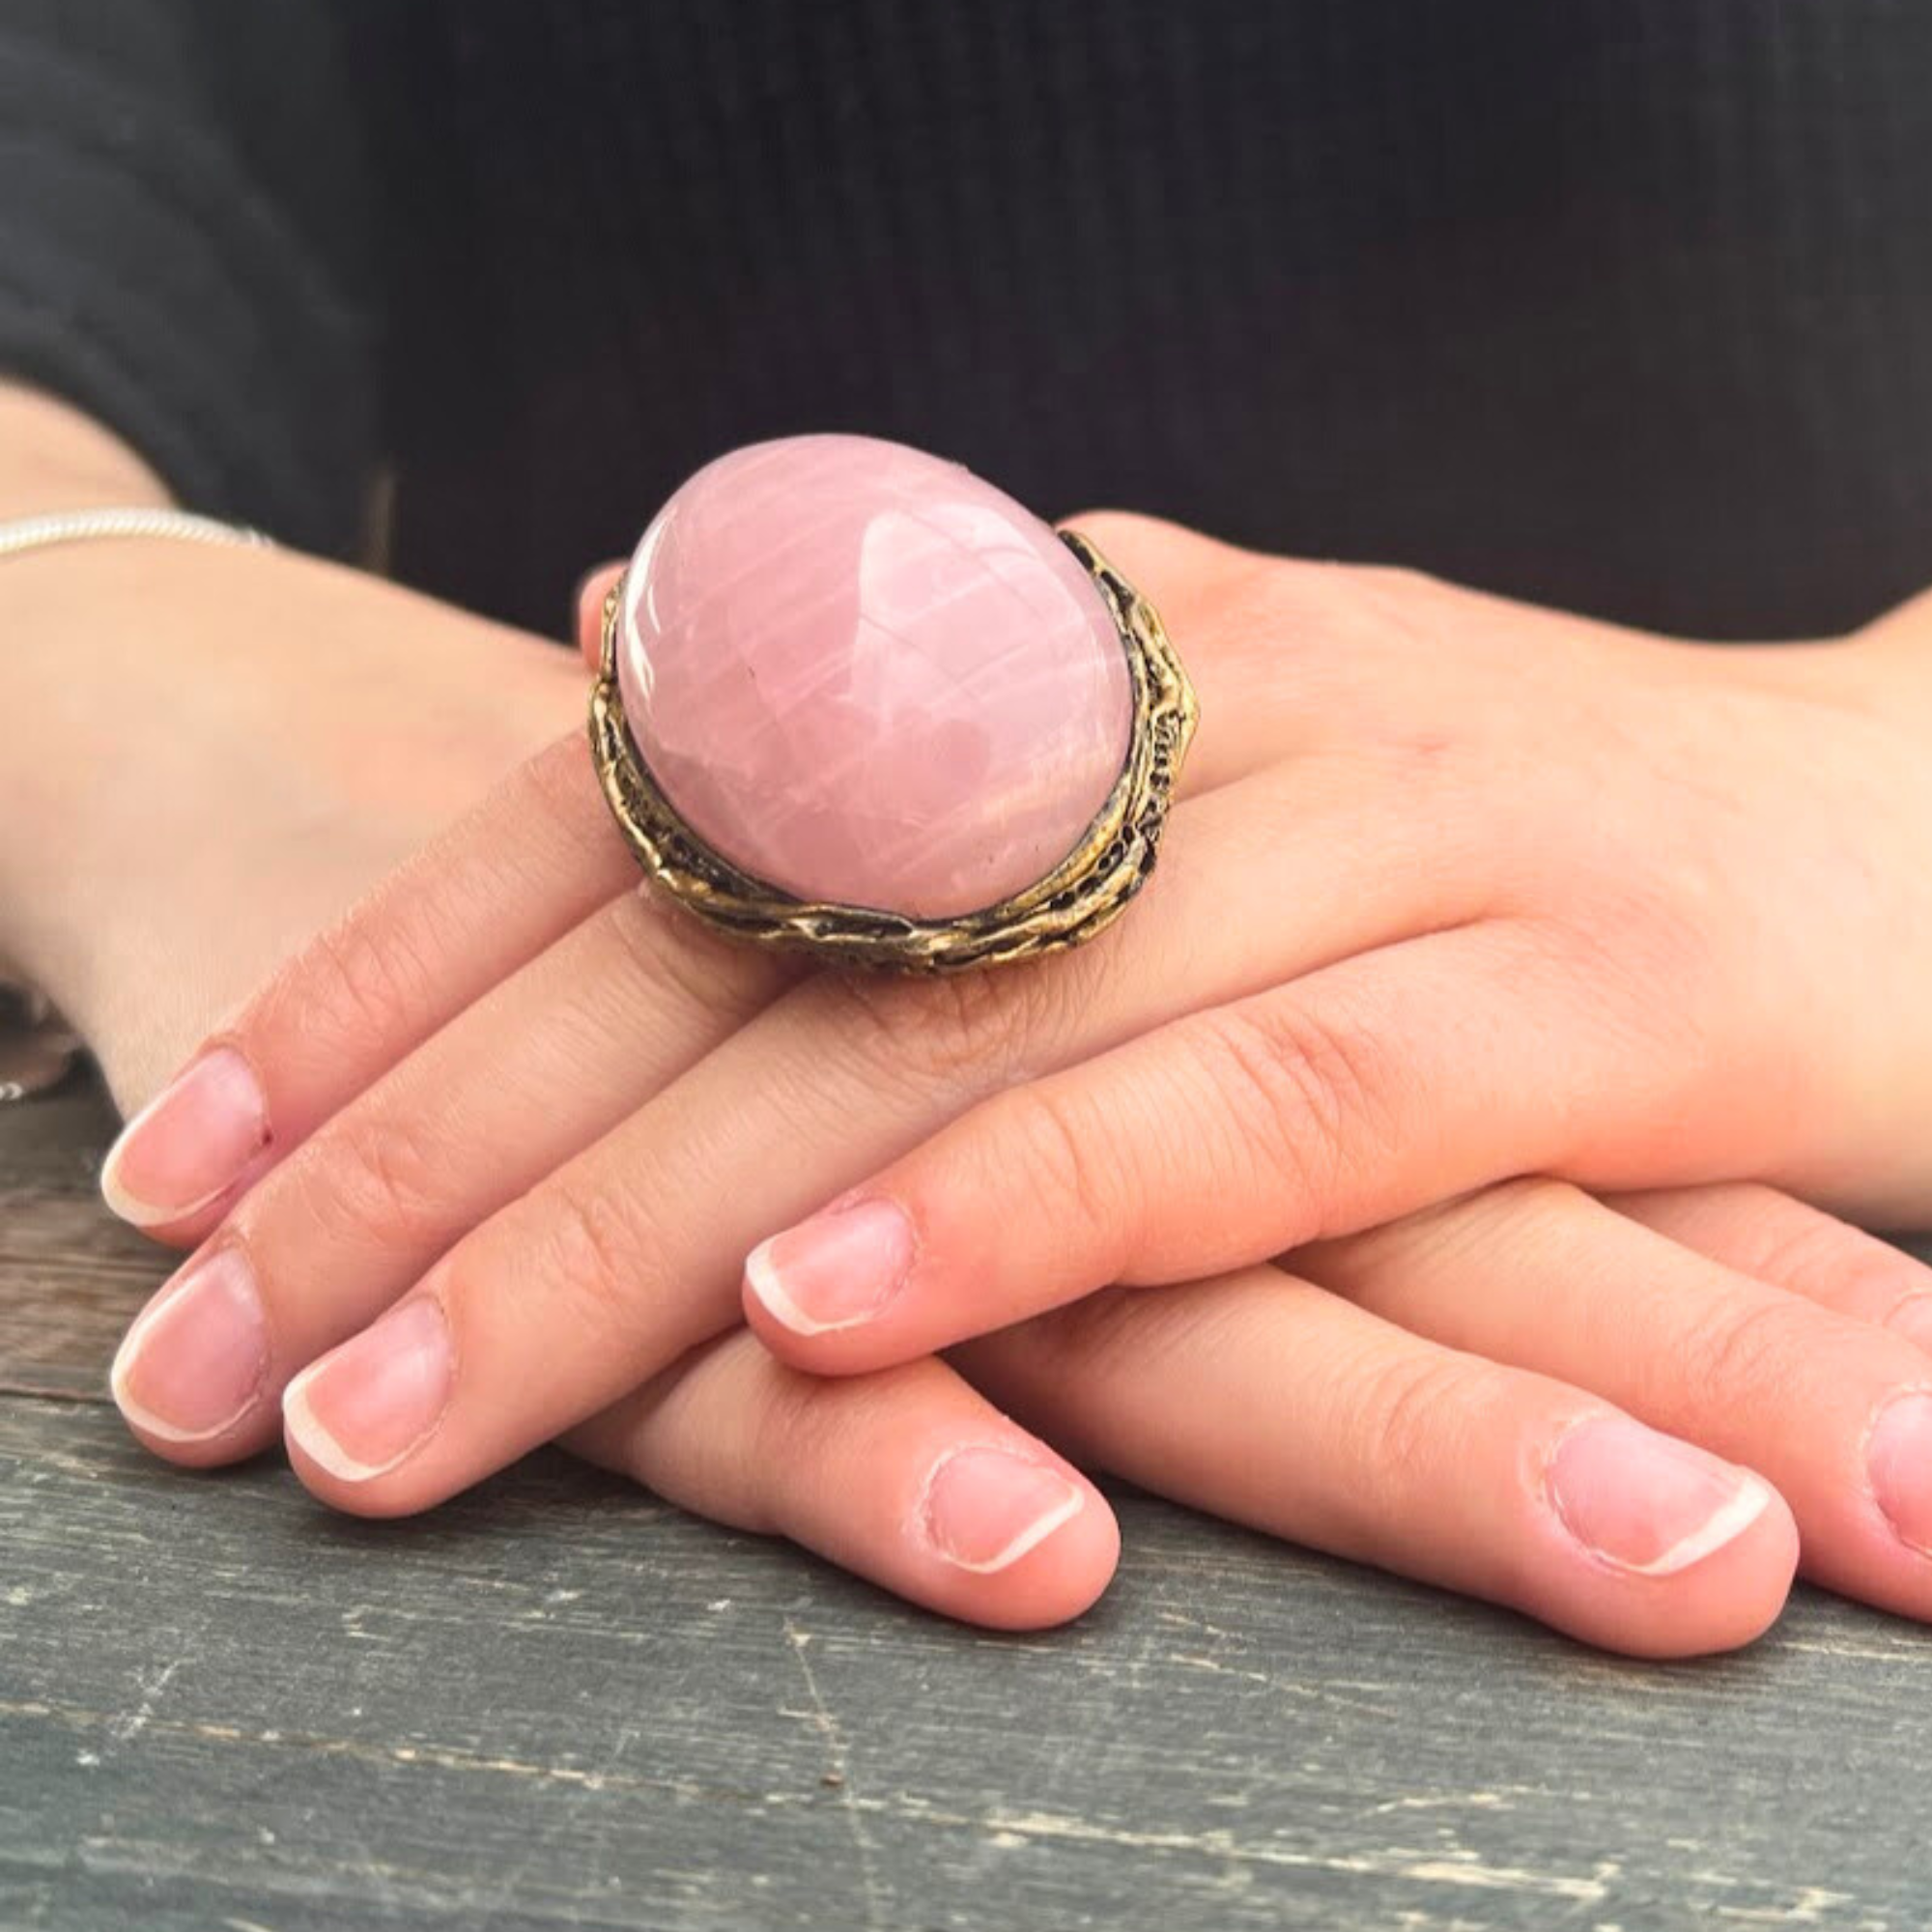 Rose Quartz Single-Stone Ring Crafted in India - Gleaming Pink | NOVICA